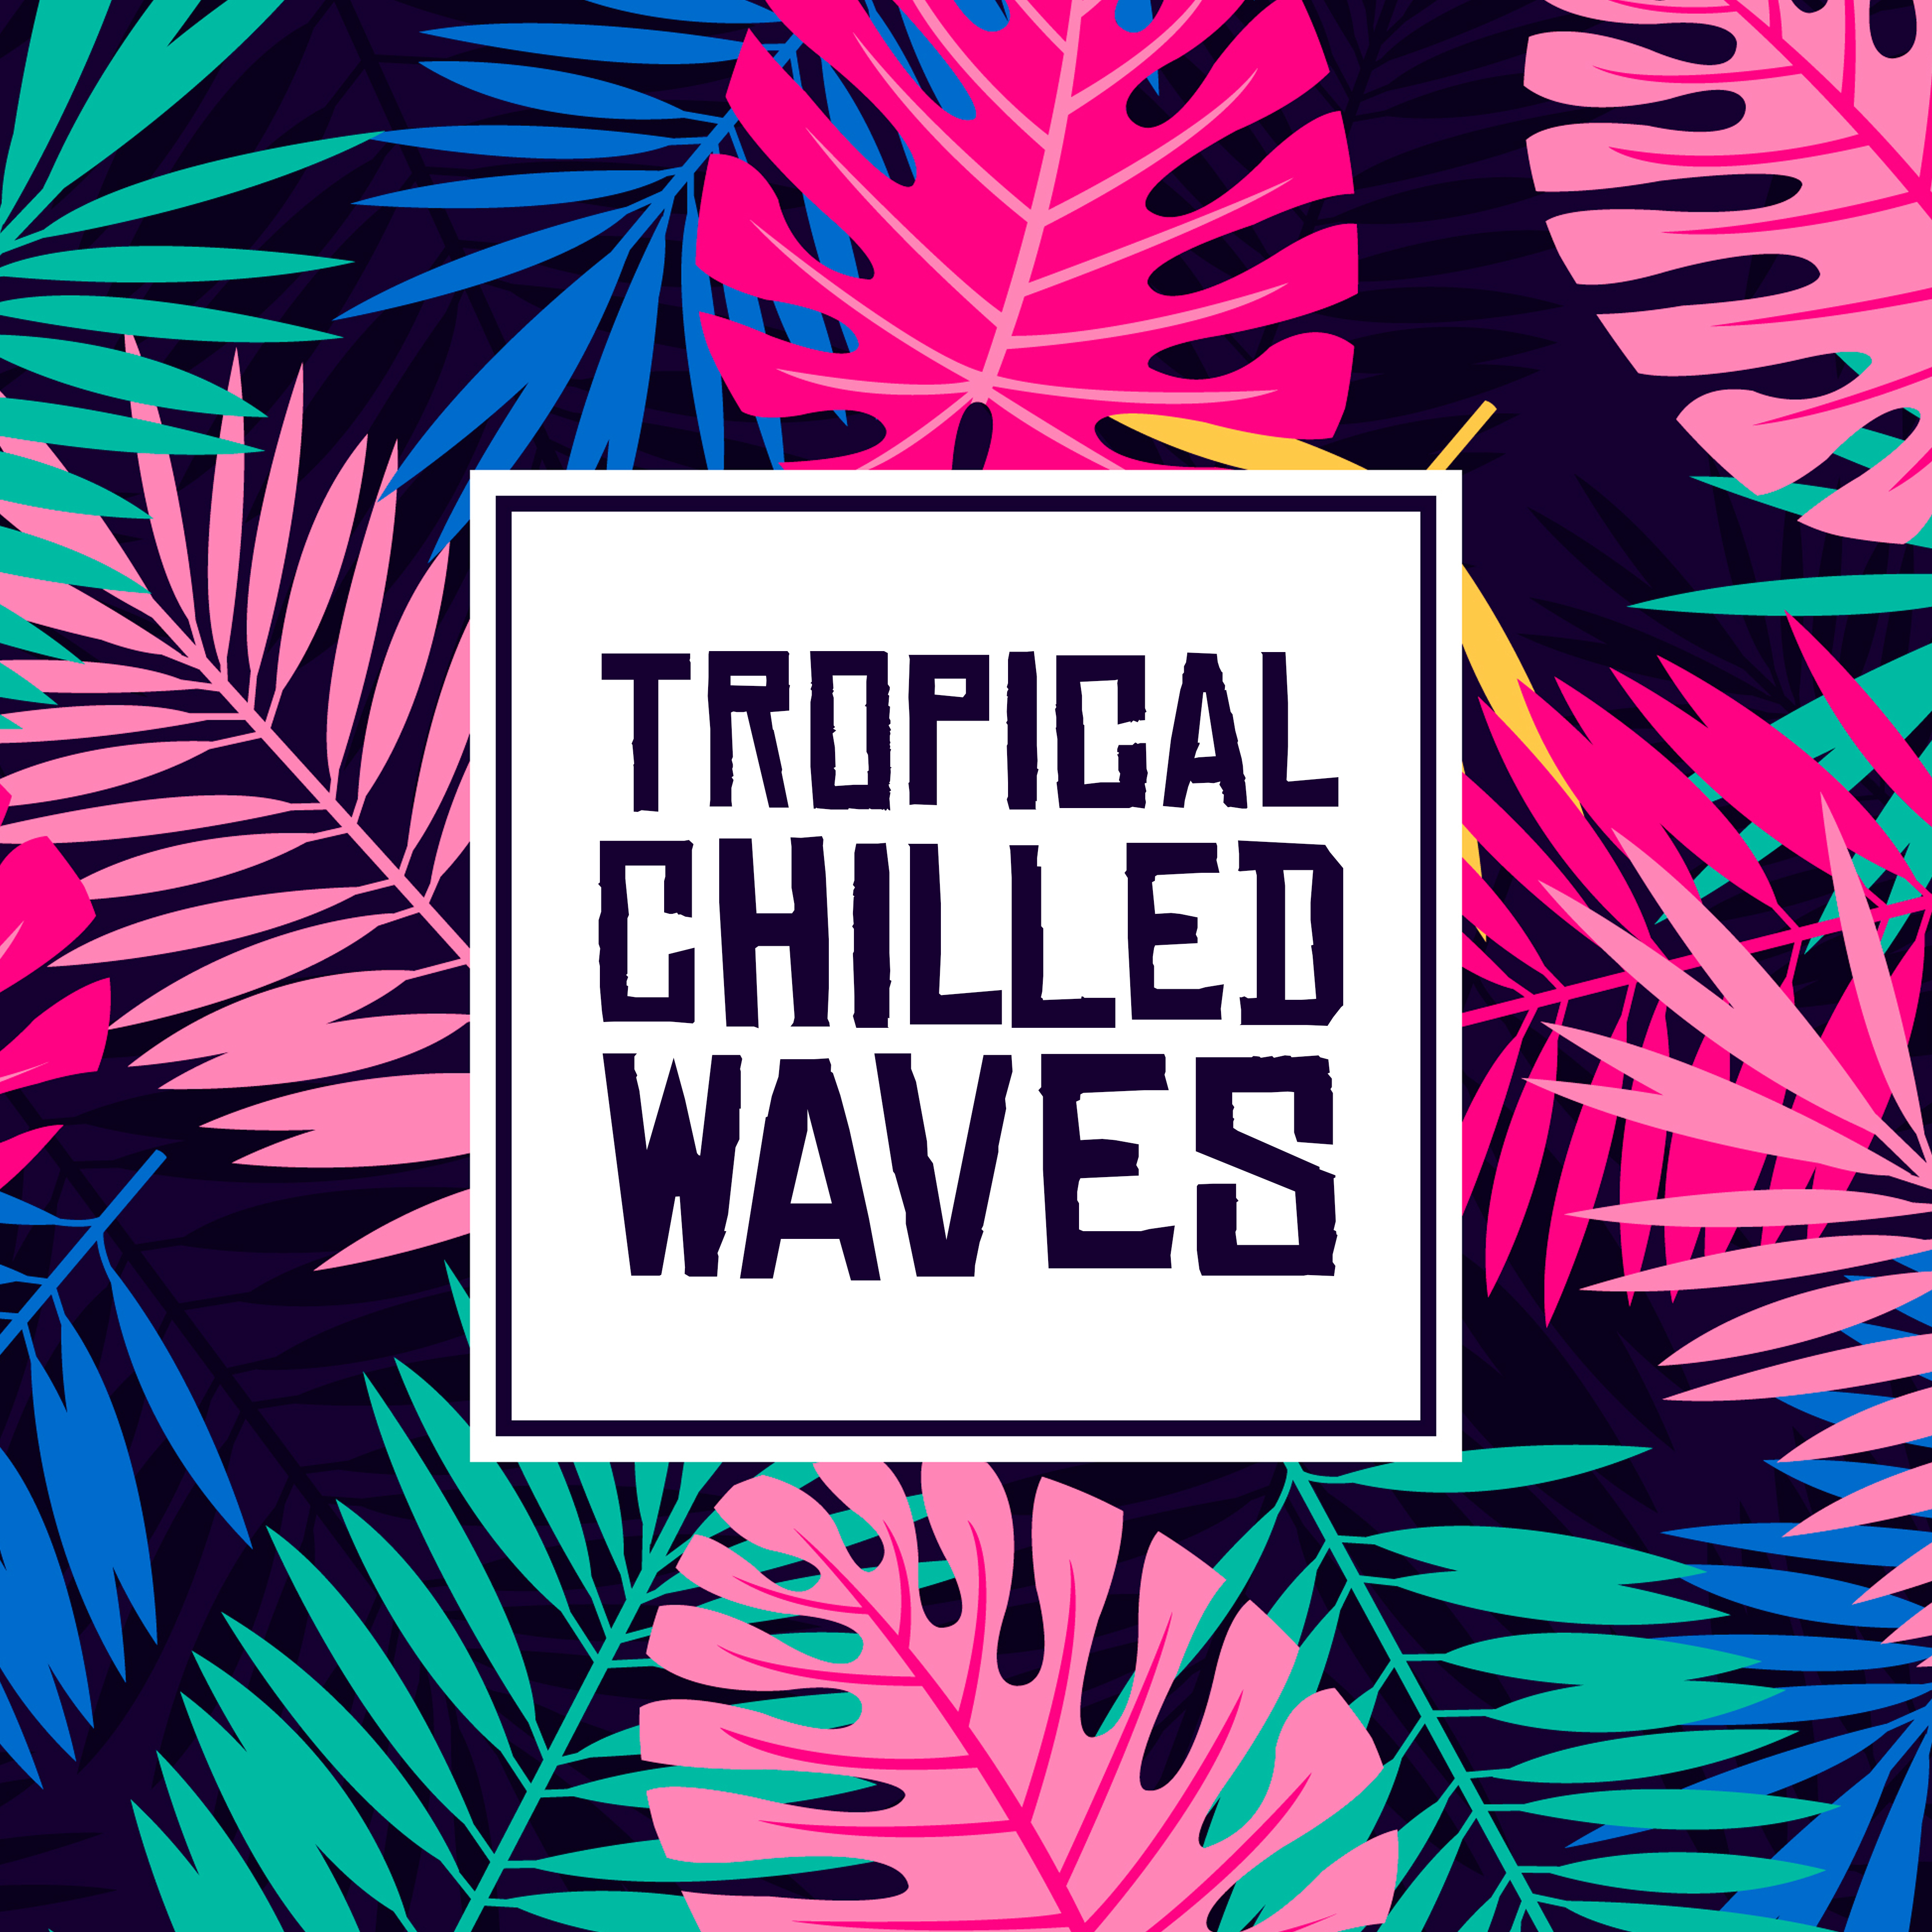 Tropical Chilled Waves